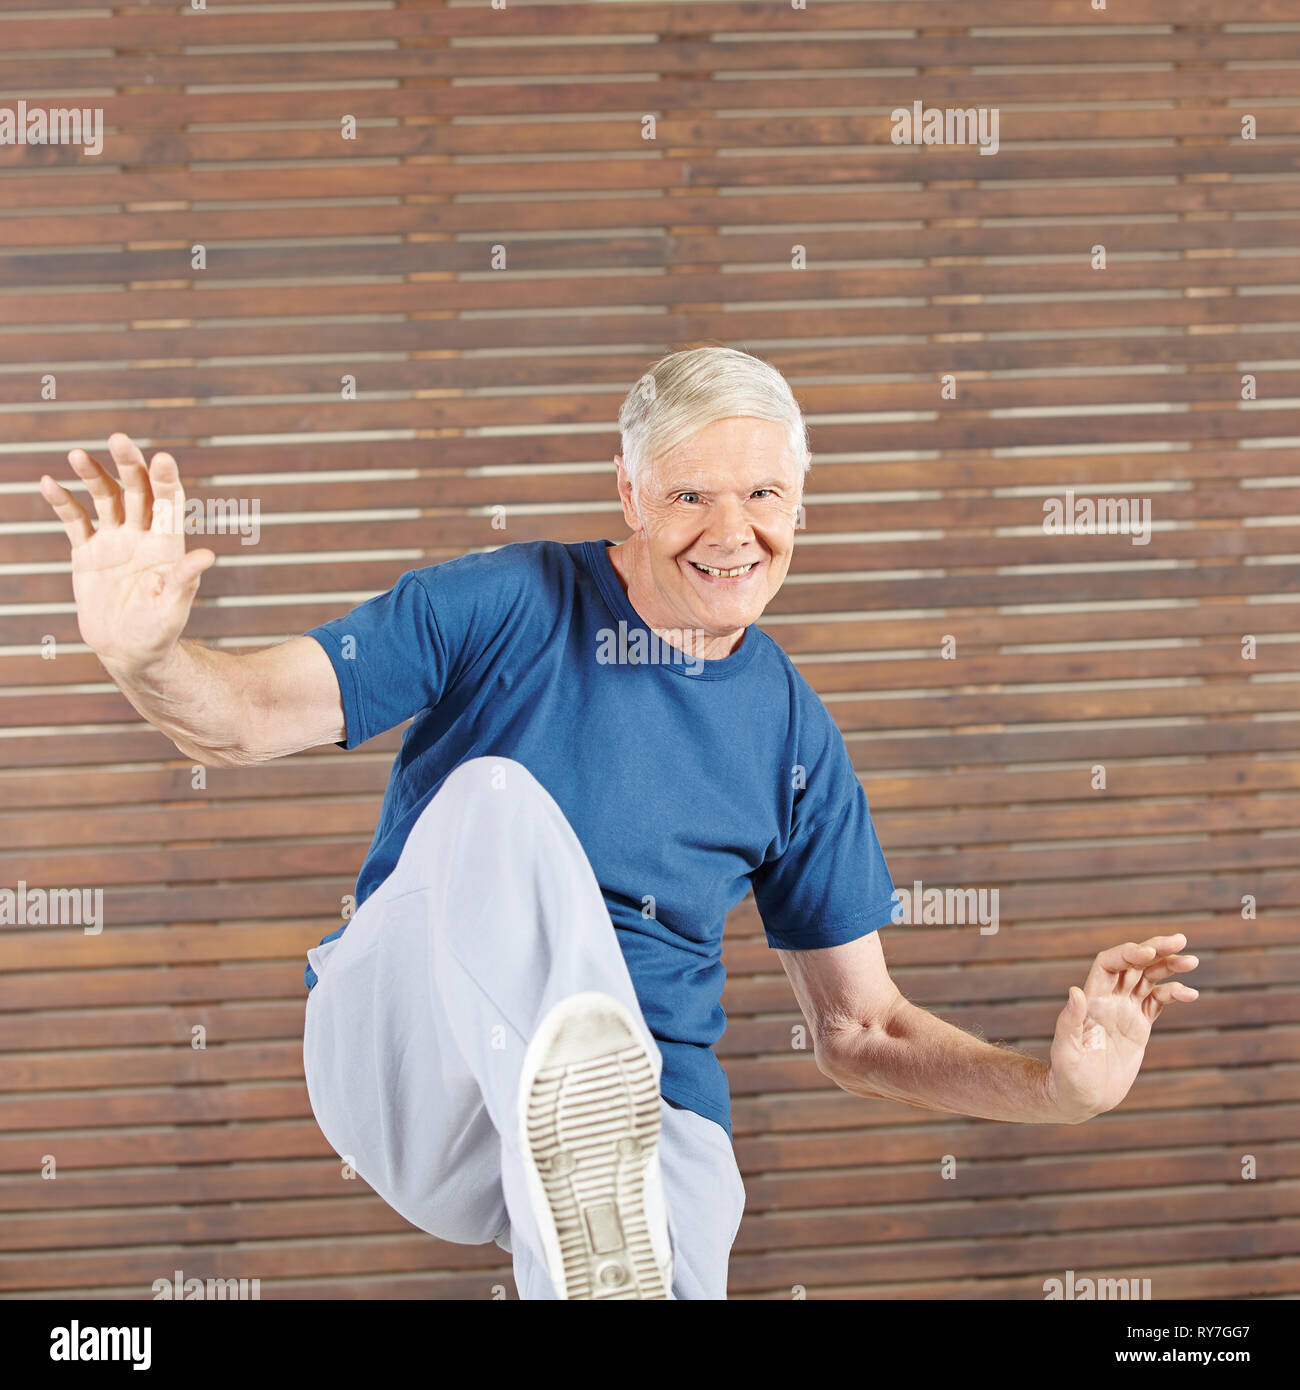 Old smiling man stays active in the gym by exercise Stock Photo